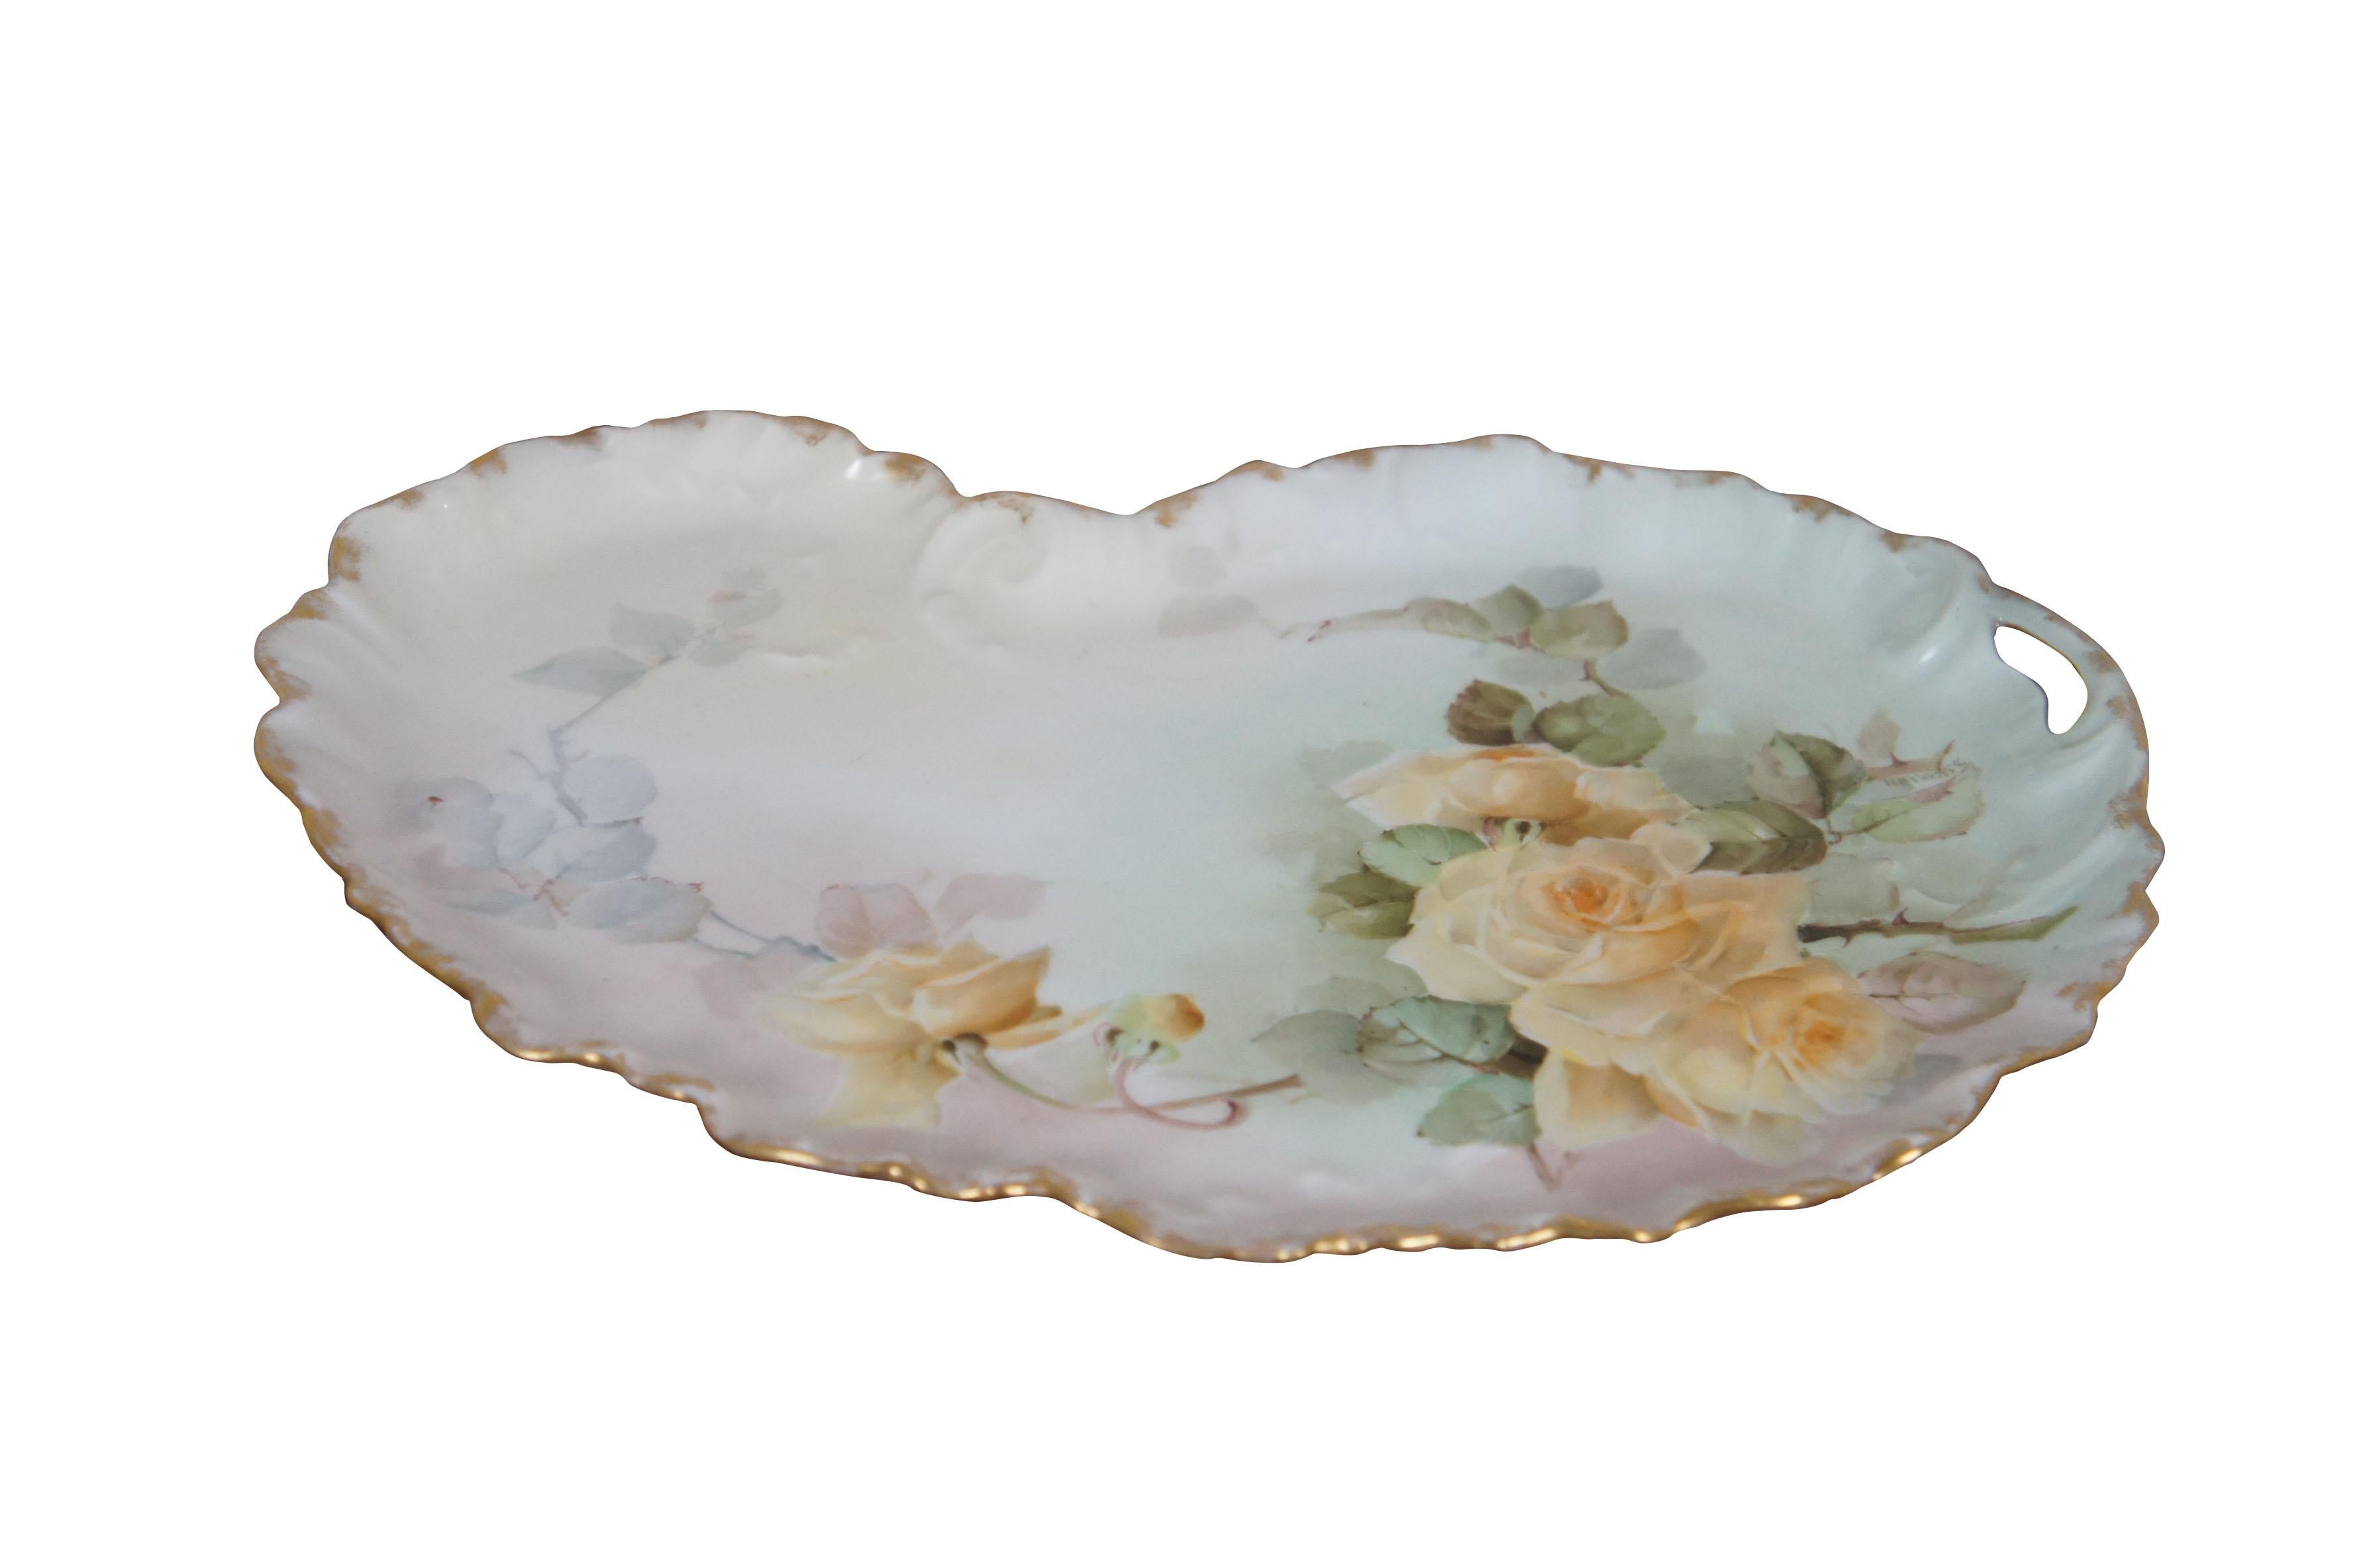 Late 19th - early 20th century Limoges porcelain vanity tray by William Guerin and Company. Kidney bean / artist palette shape with gilded, scalloped edge and pierced handle. Hand painted with green and mauve ombre and stems of yellow roses. Signed